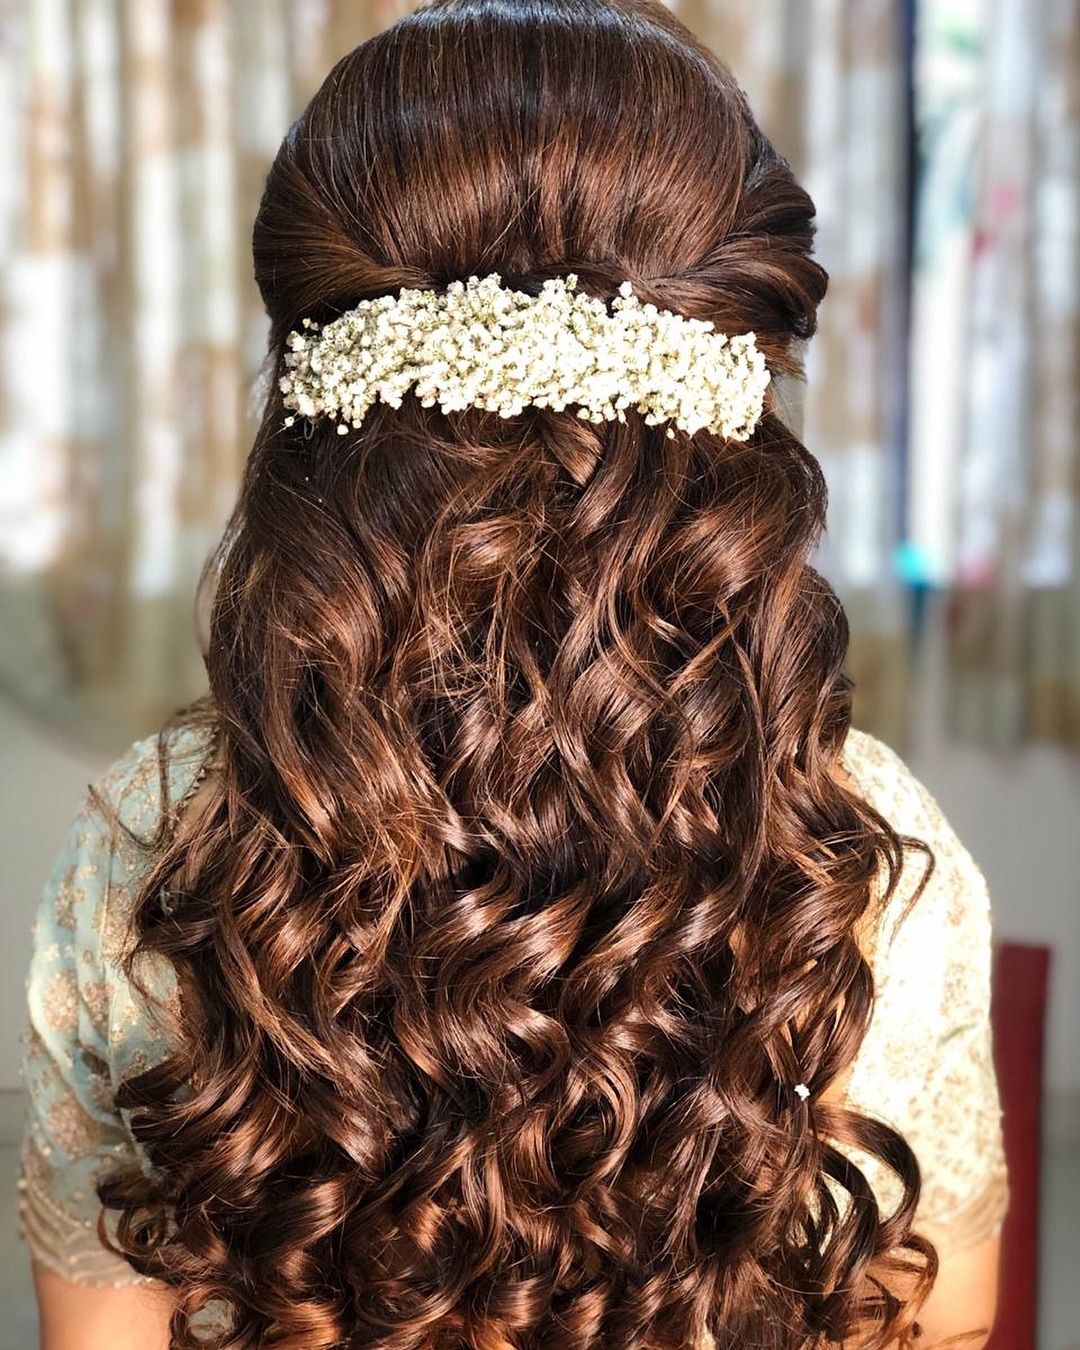 25 Simply Stunning Engagement Hairstyles Perfect for Prewedding Ceremonies   Bridal Look  Wedding Blog